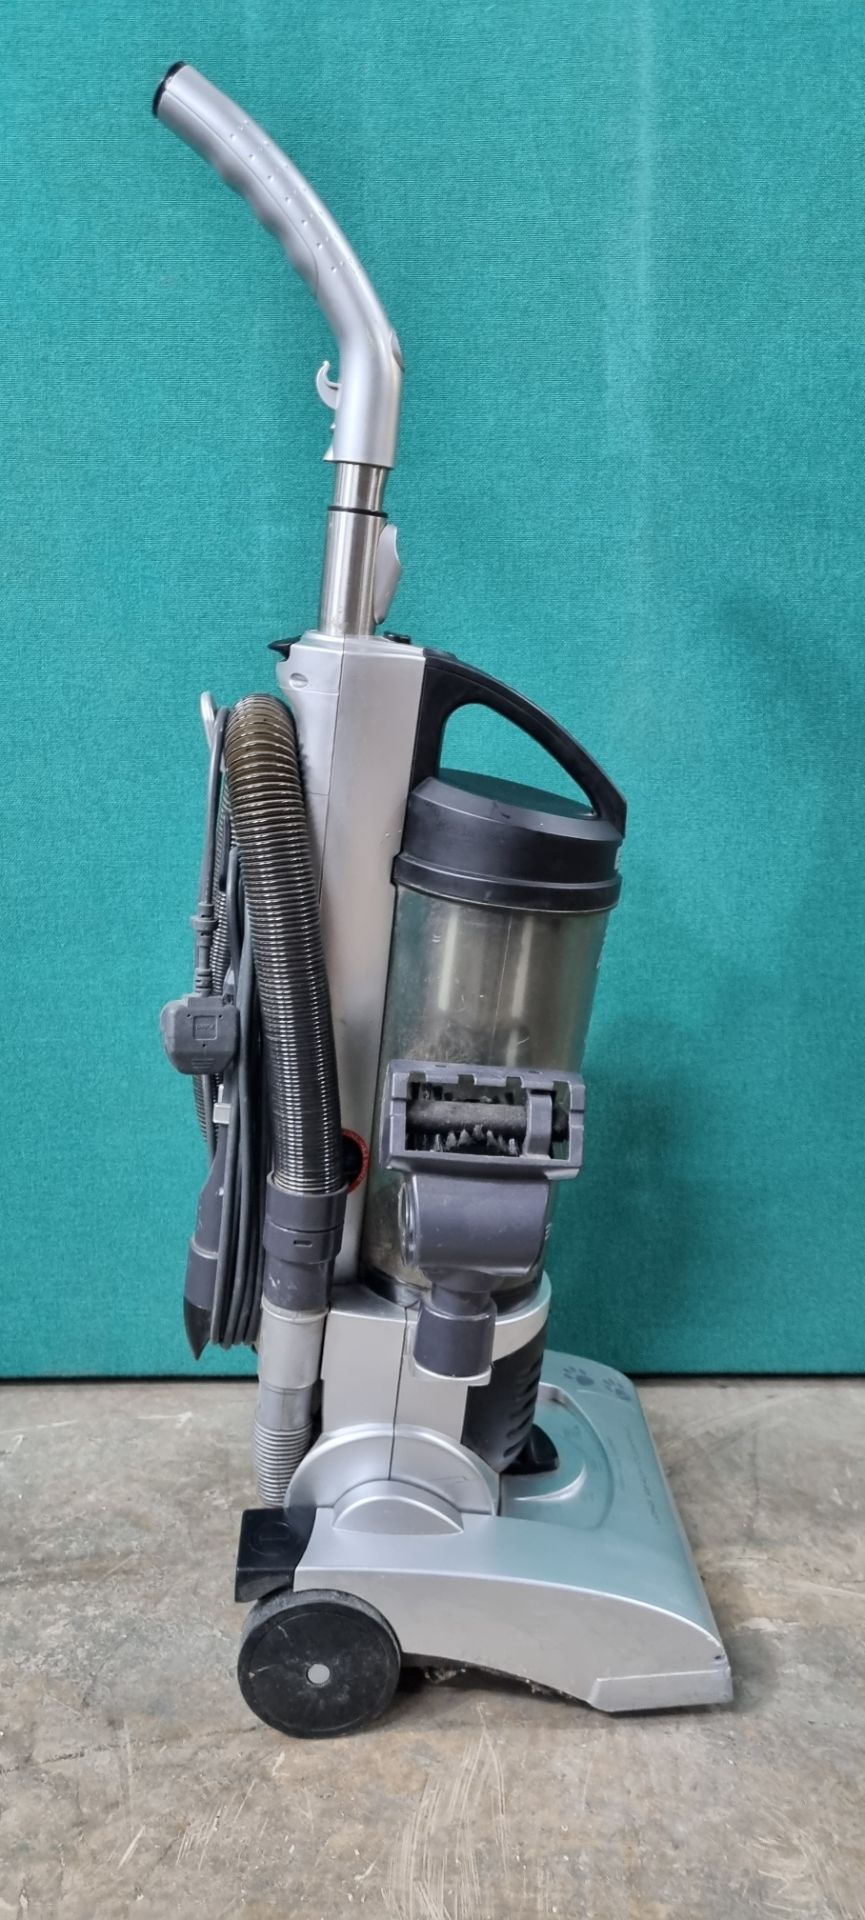 1 x Hoover 2300W Long Reach Cleaning Vacuum Cleaner HP2300001 - Image 4 of 6